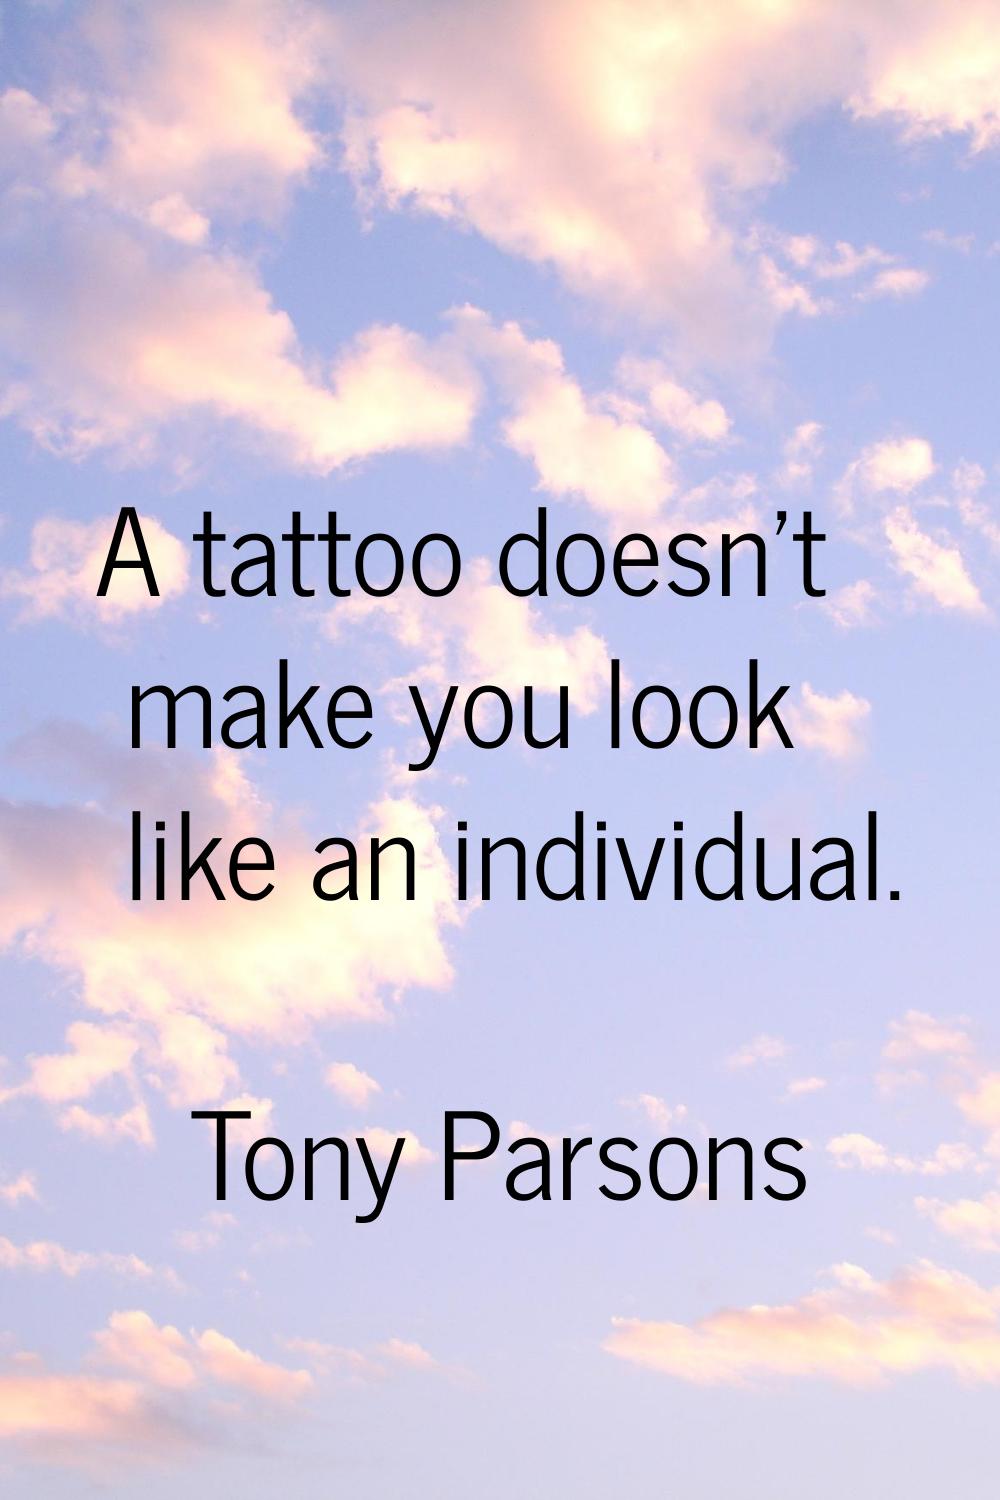 A tattoo doesn't make you look like an individual.